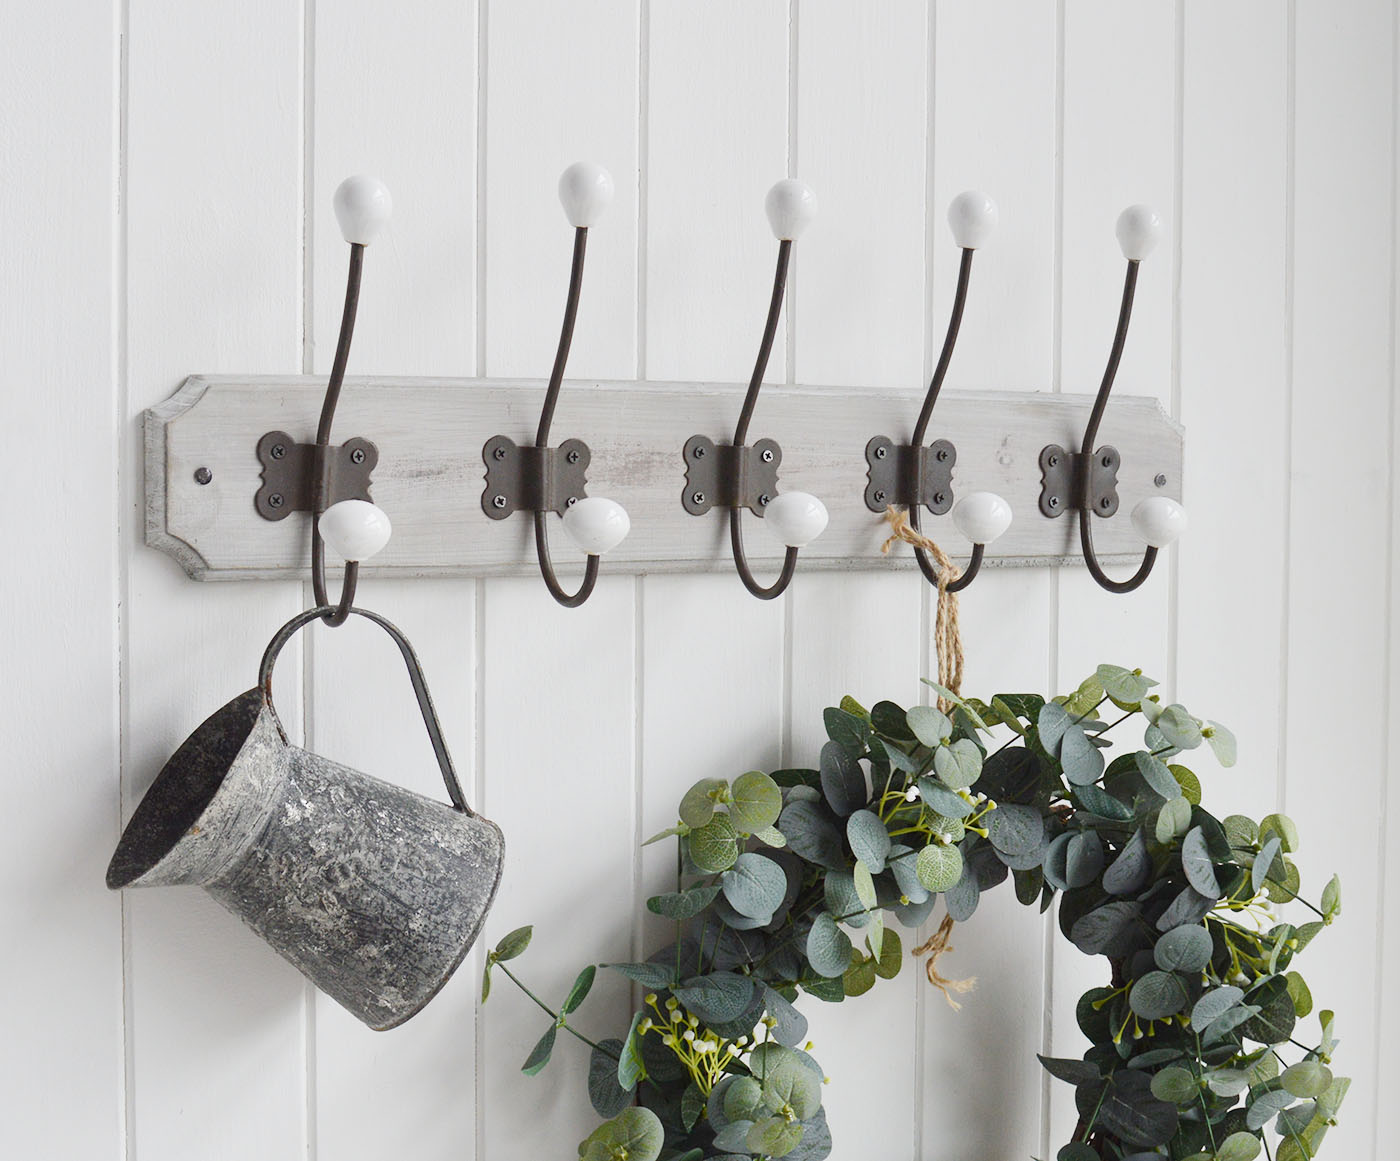 A wall mounted coat rack with five aged metal double hooks with porcelain ends on a rustic grey washed wooden backing.

The Pawtucket Range is a range of furniture and home decor made from grey wash reclaimed wood for an authentic distressed rustic look